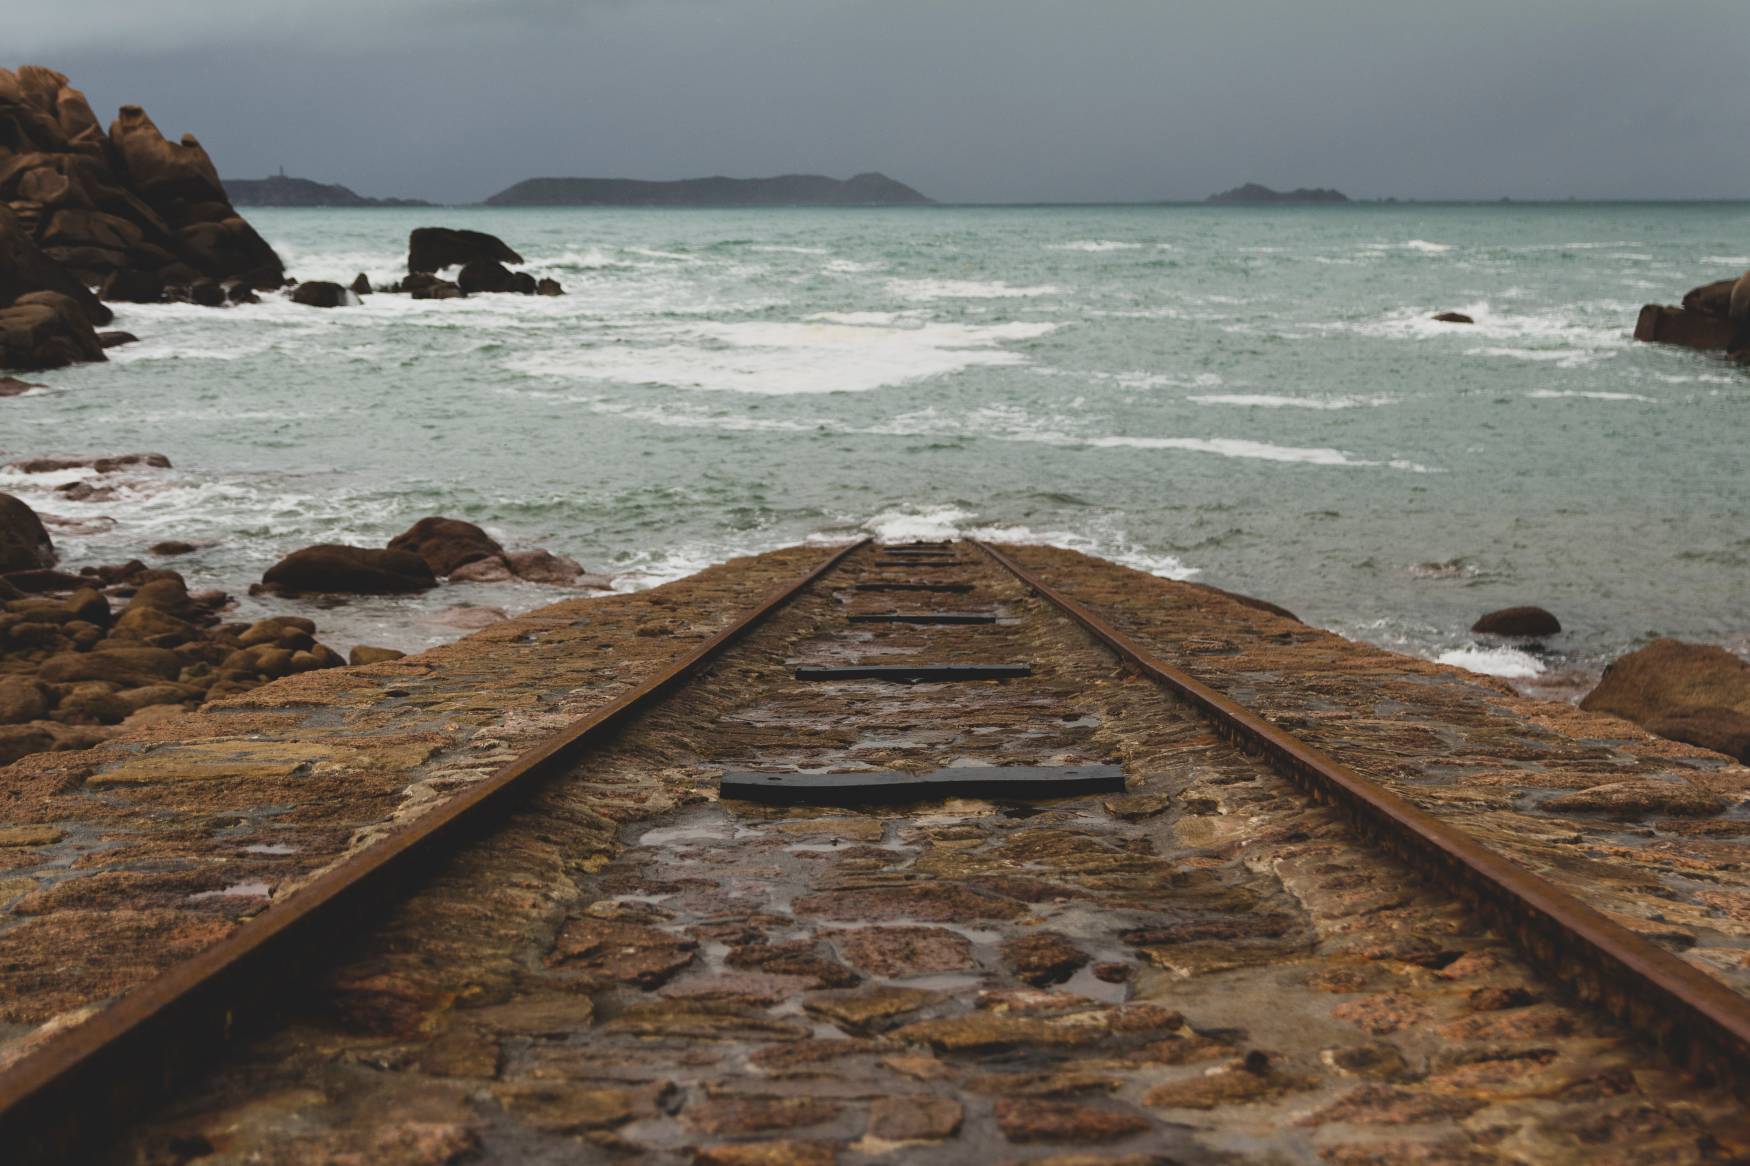 Train track going down into the ocean